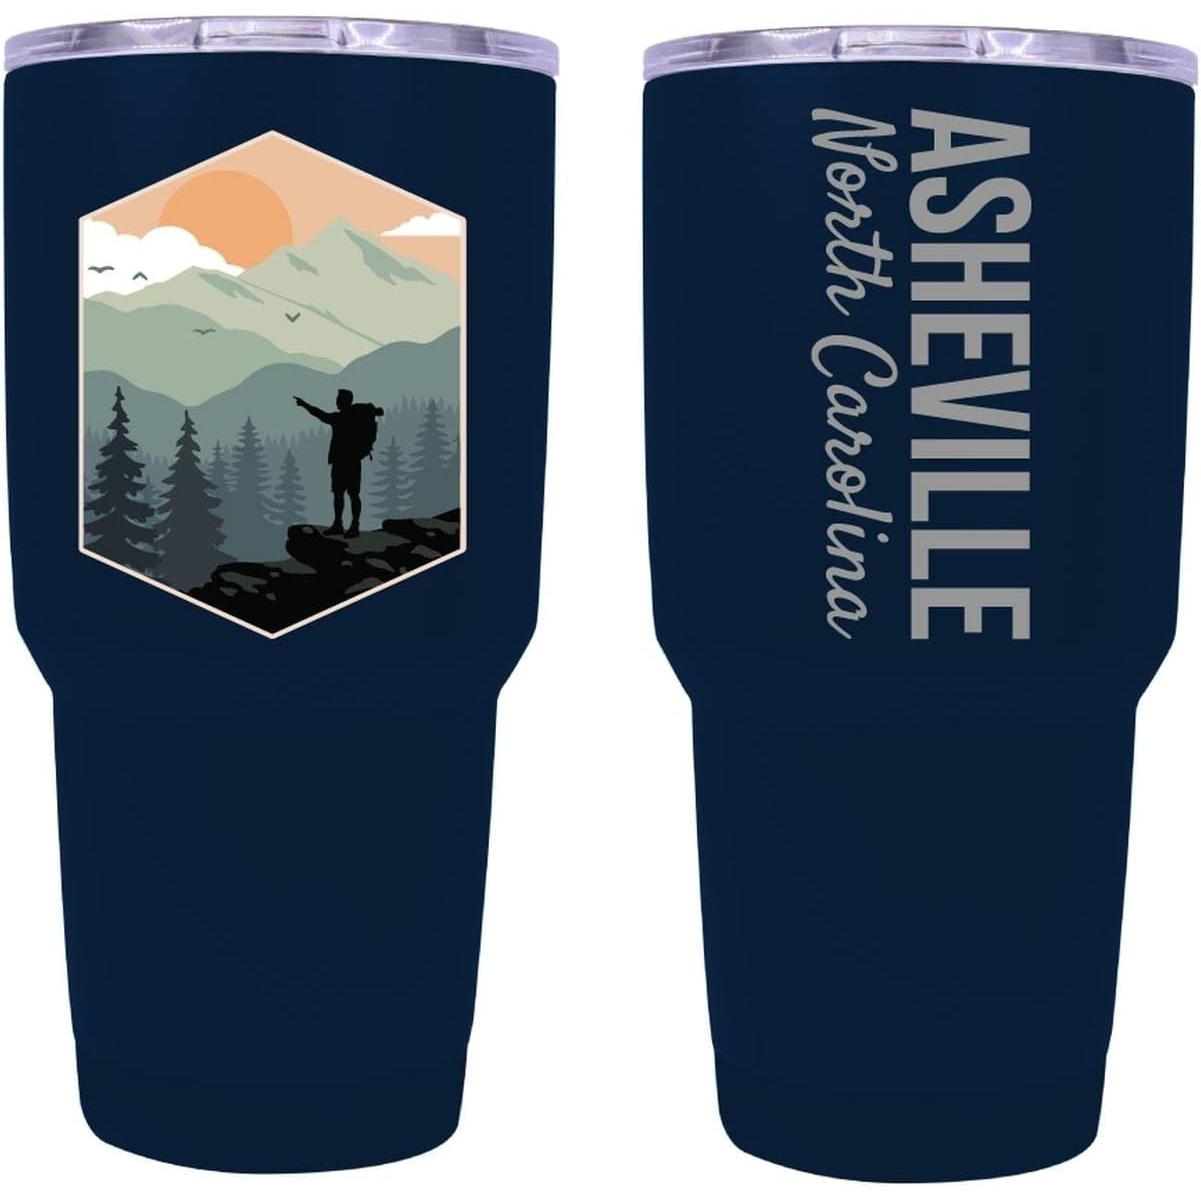 Asheville North Carolina Souvenir 24 Oz Insulated Stainless Steel Tumbler - Rose Gold